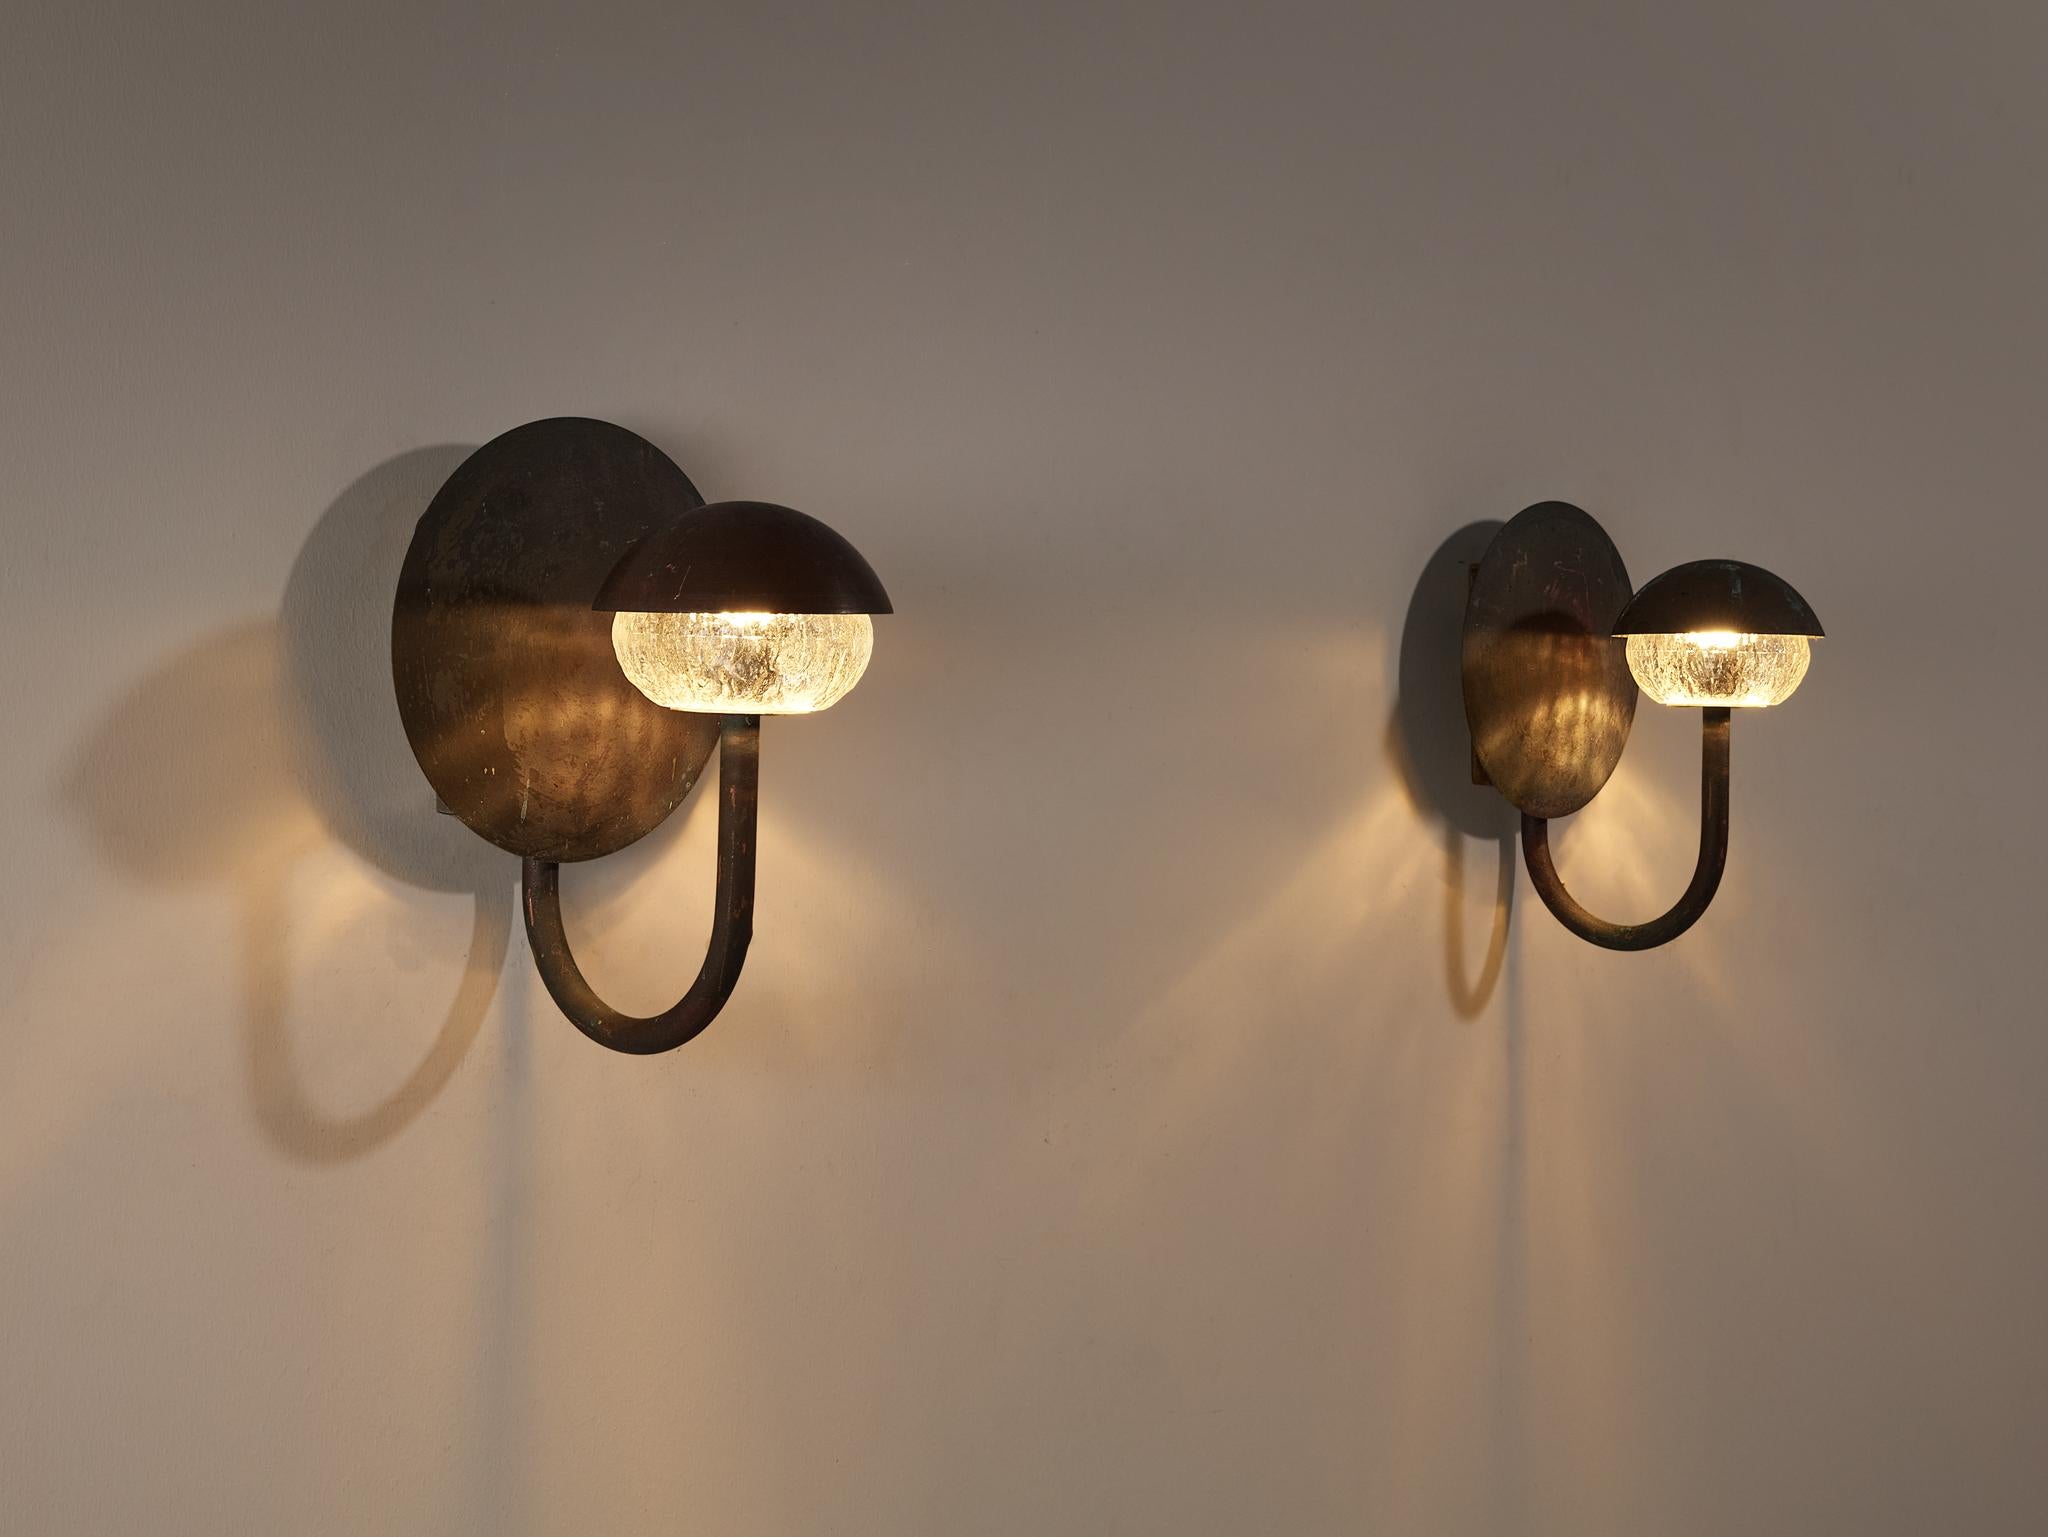 Pair of wall lights, patinated copper, glass, Scandinavia, 1960s

Charming pair of wall lights executed in copper with a ribbed glass shade. This lamp exists of a copper circular wall plate, connected to the copper arm which holds the sphere.
It